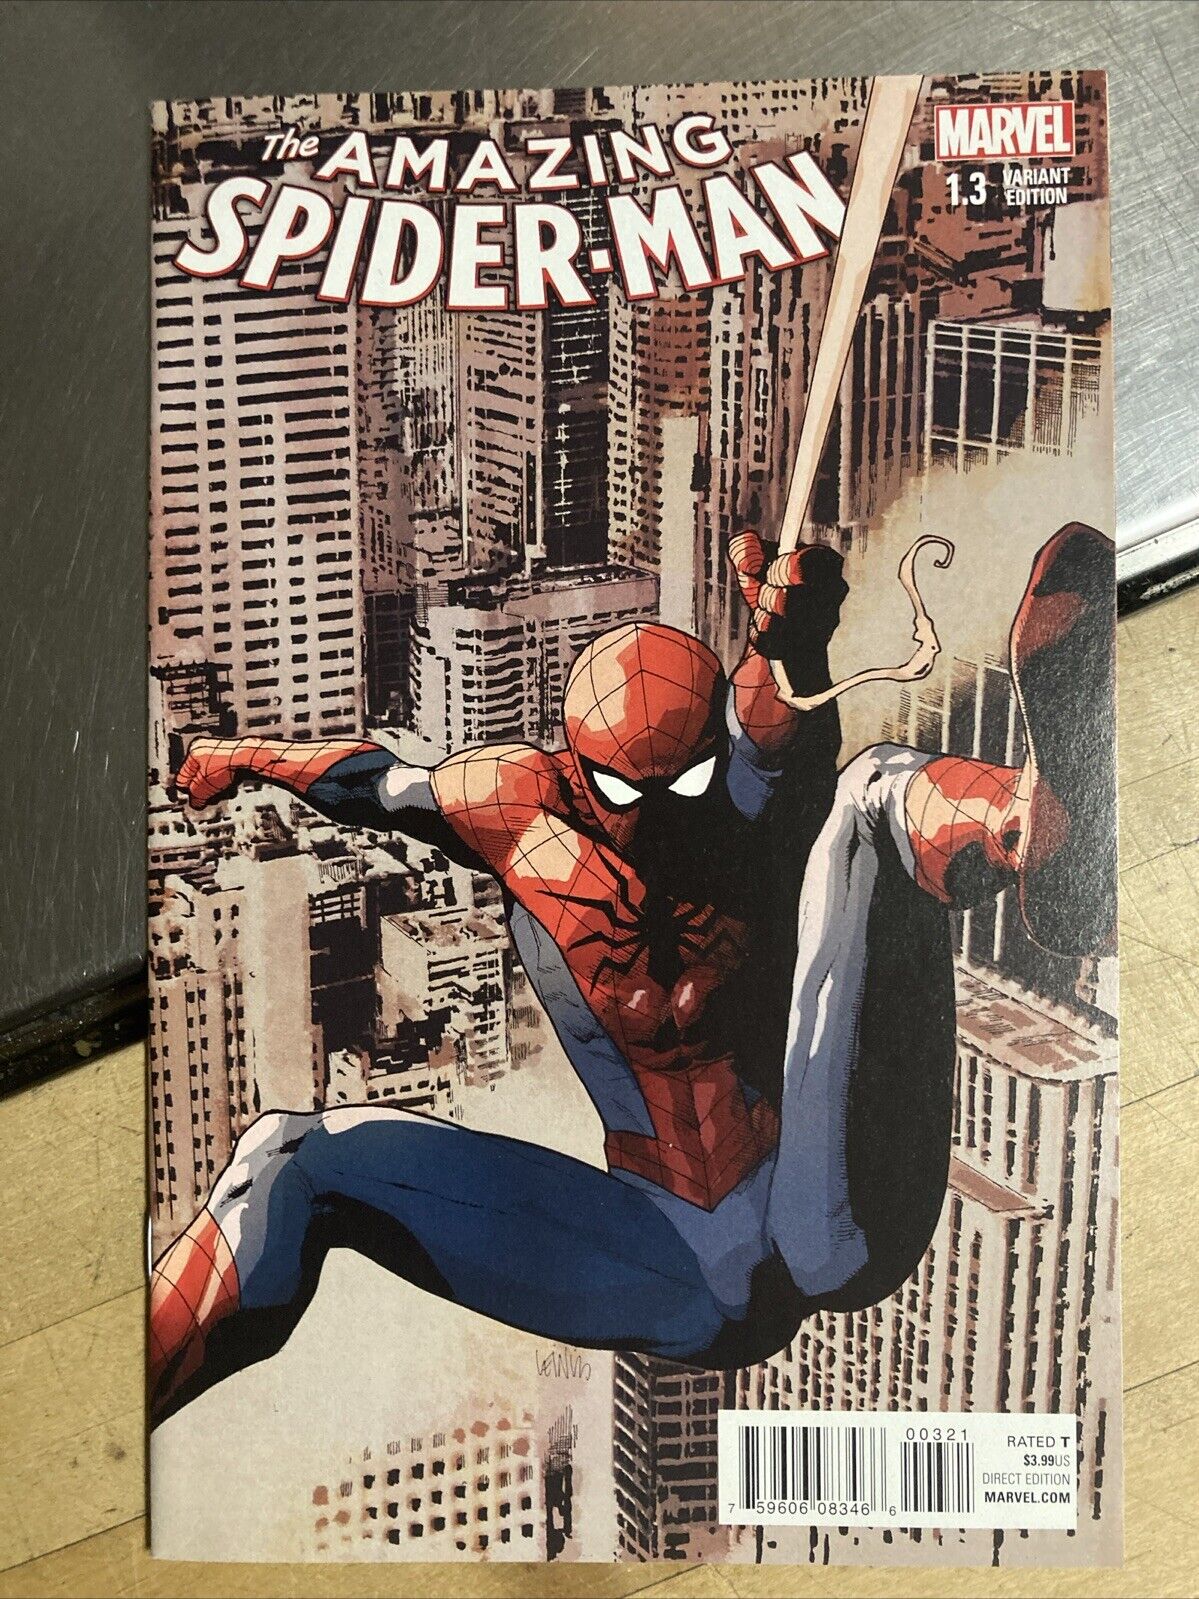 Amazing Spider-Man 1.3 Variant Cover 1:25 - Marvel Comic Book - New Condition